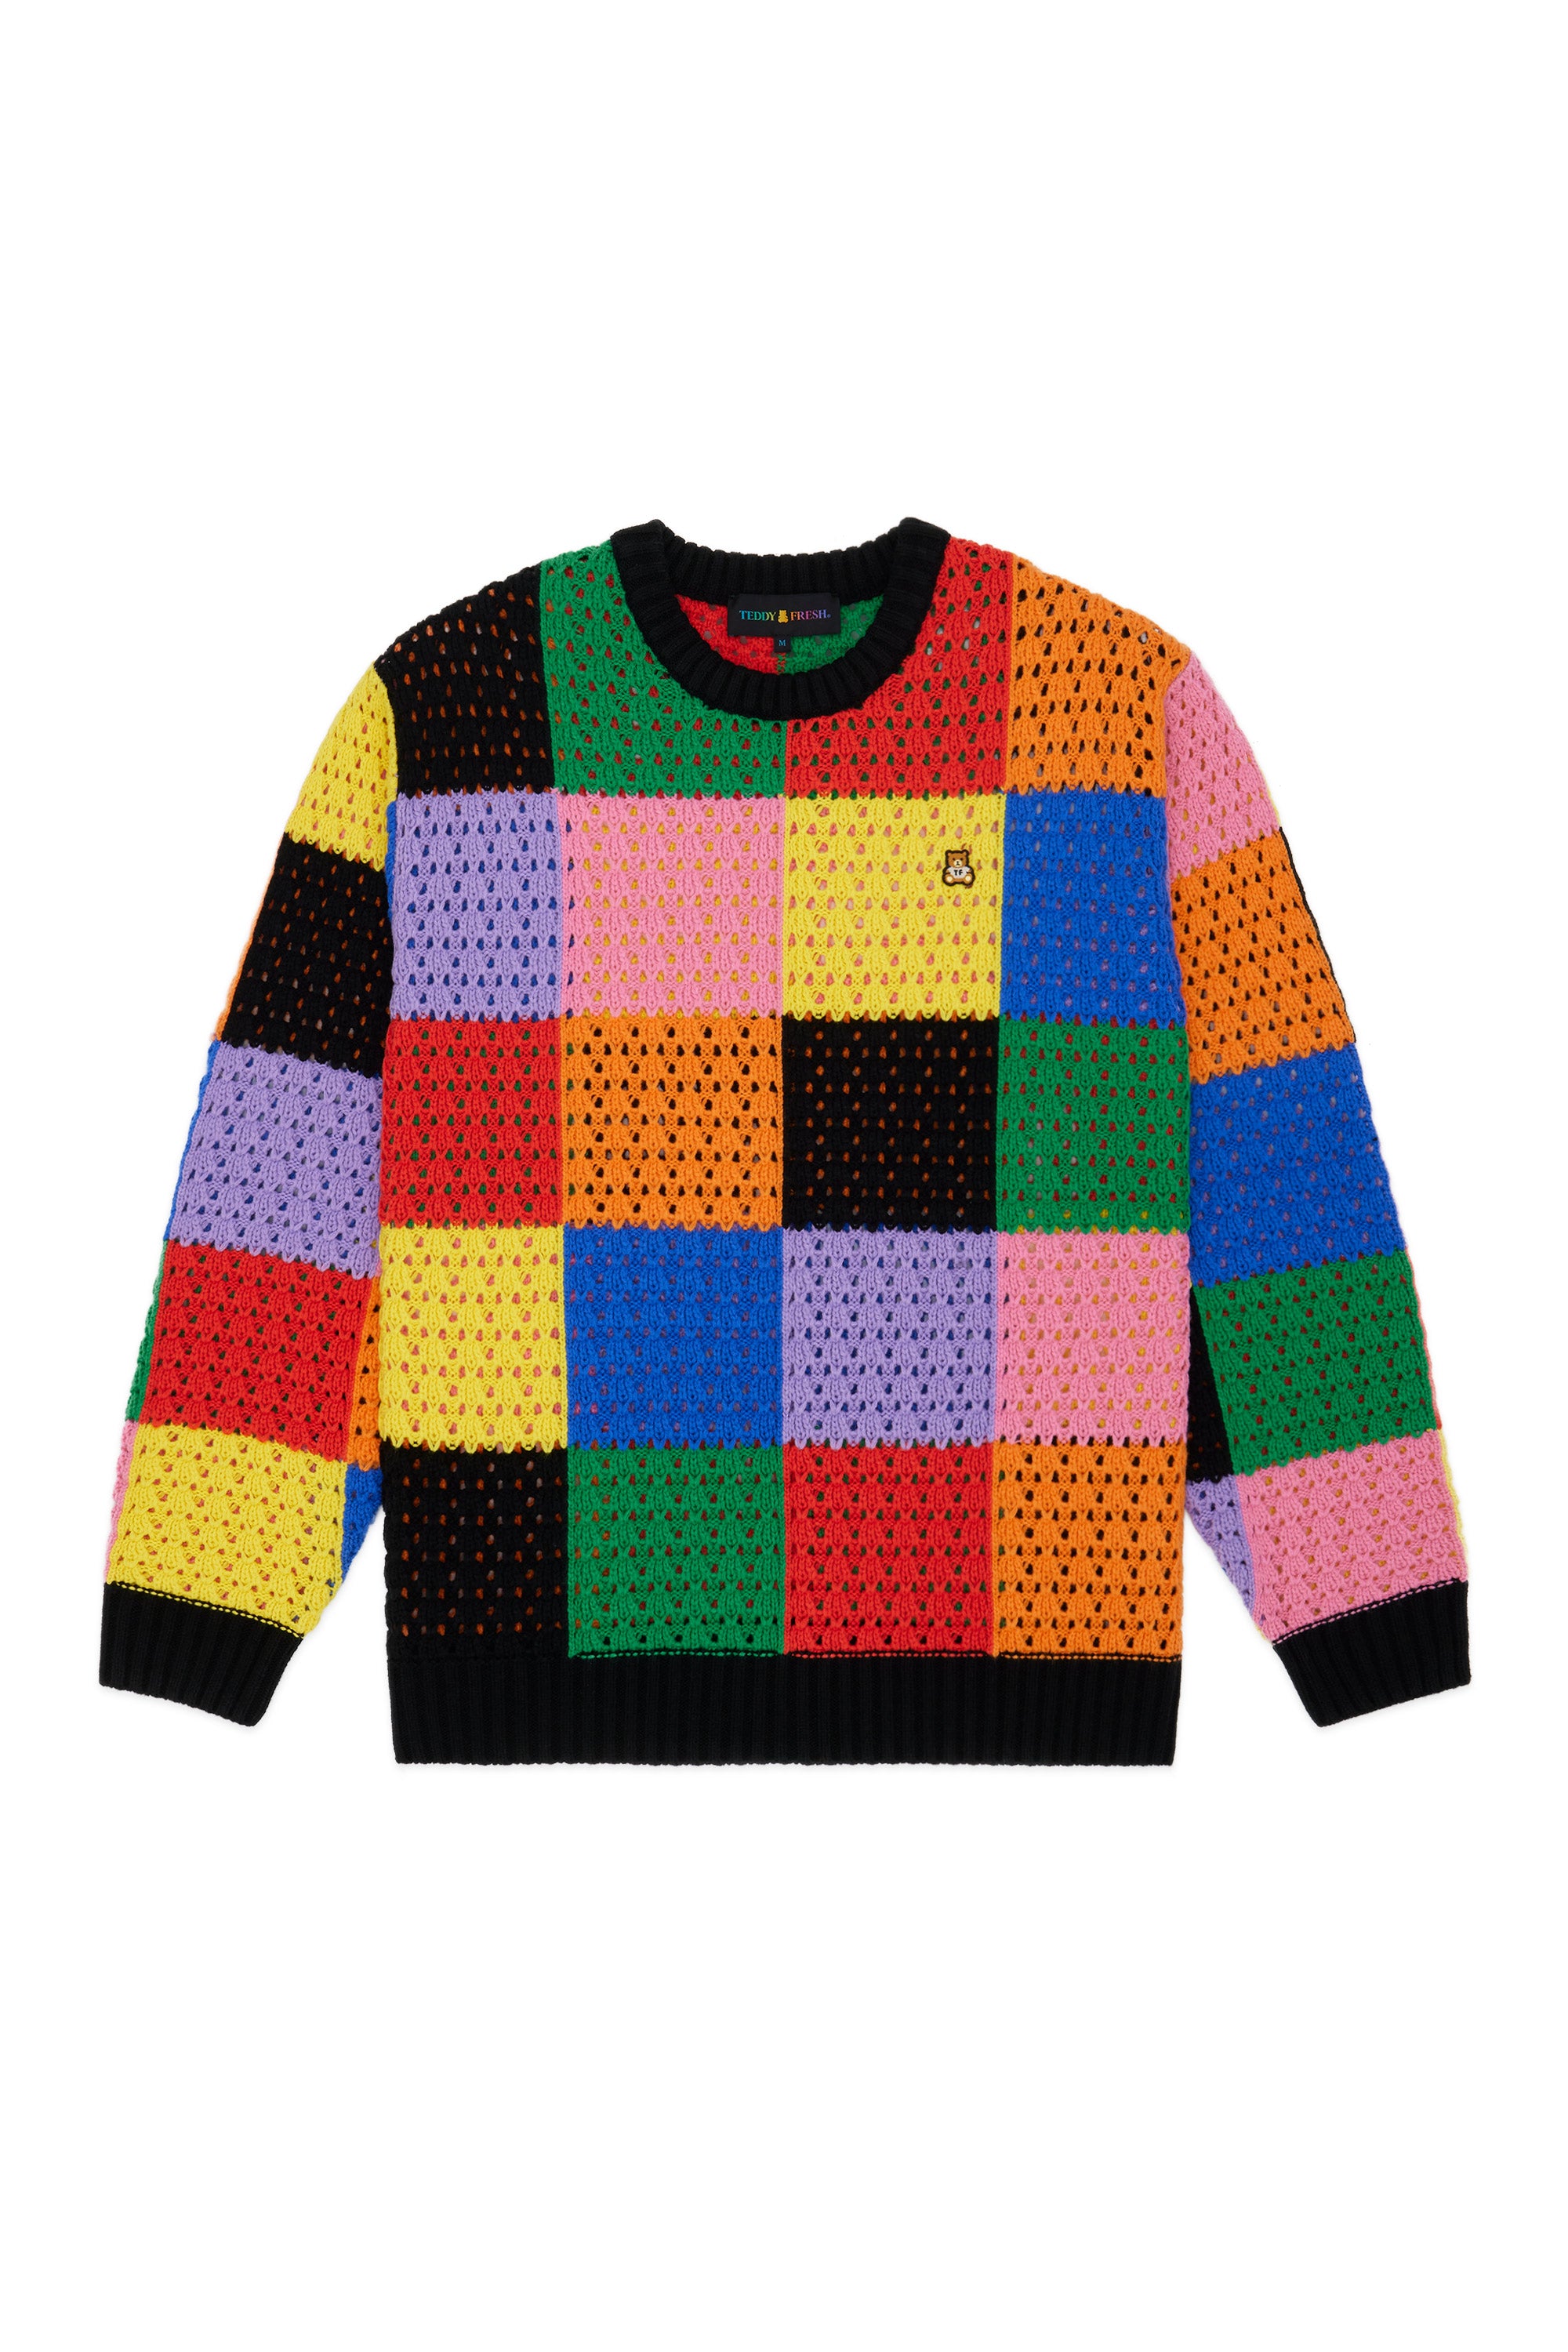 Ted Sweater Vest - Teddy Fresh